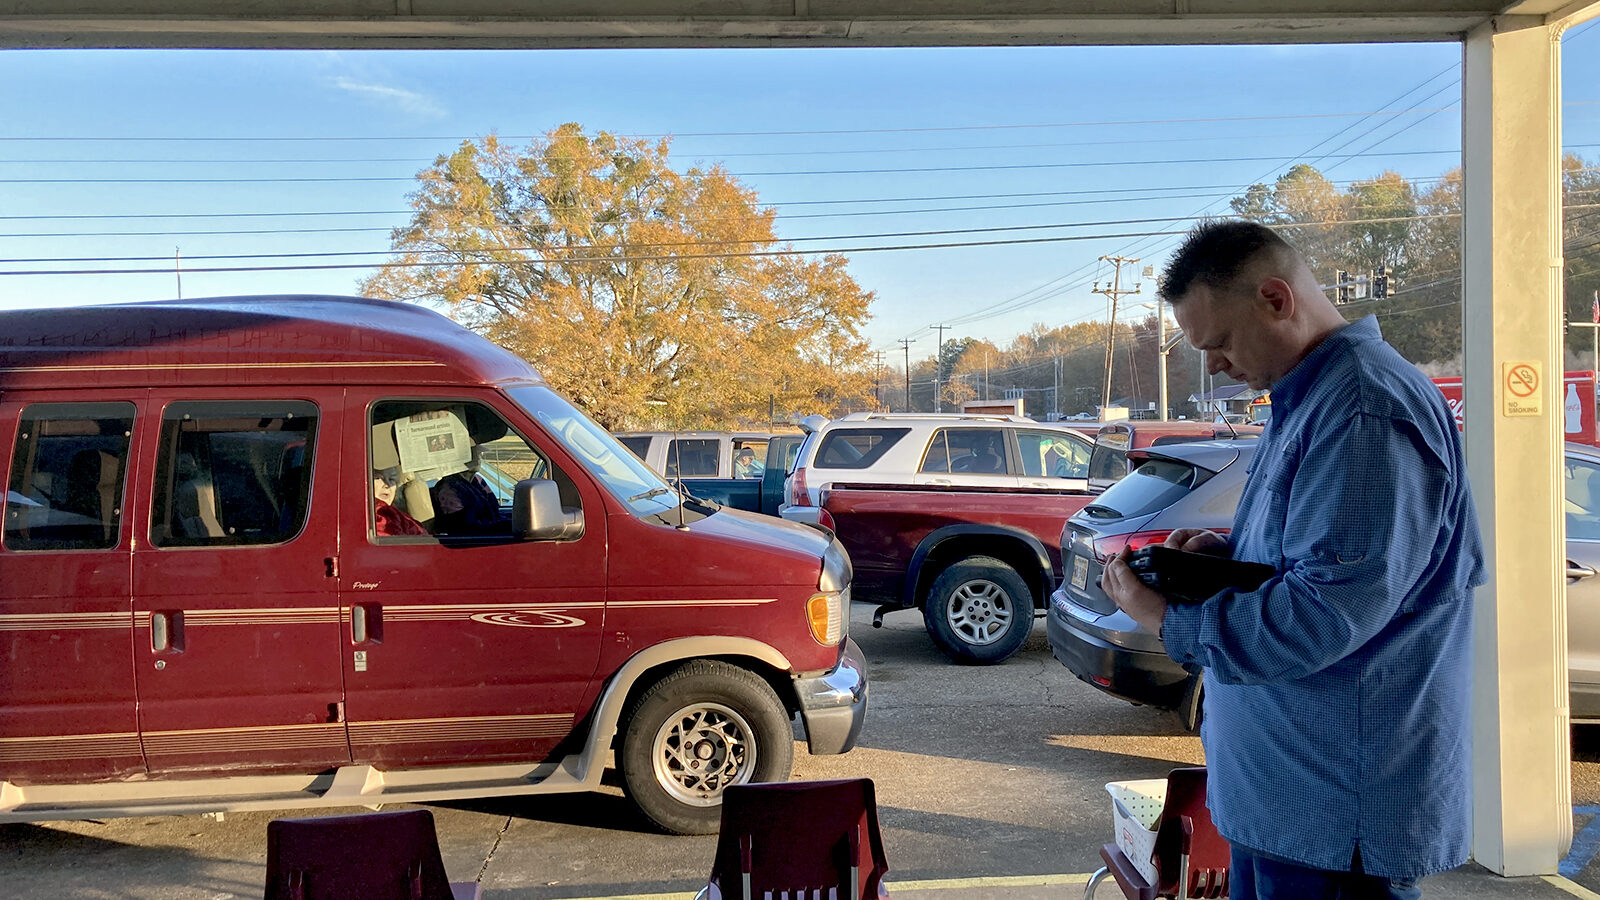 Executive Director Jason Martin oversees the Saint Luke’s Food Pantry car line while a maroon van waits for its turn to receive food and supplies.